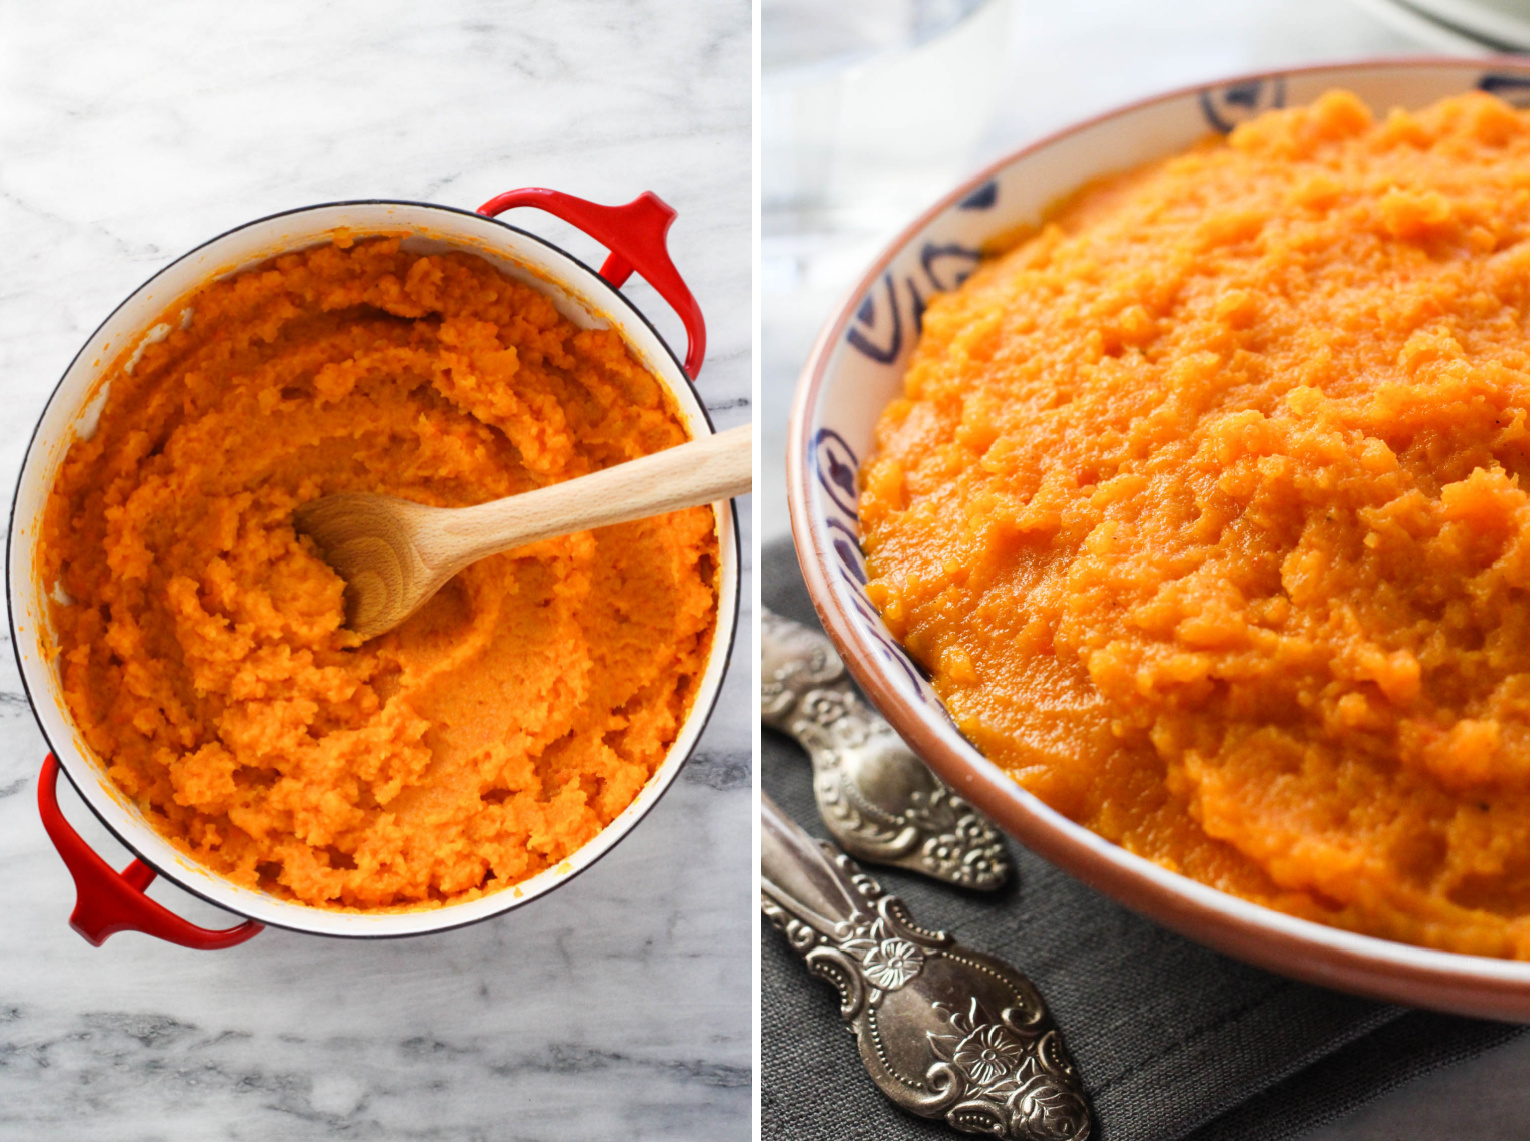 Two images side-by-side. On the left image, carrot and swede mash in a pot with a wooden spoon in the mash. On the right image, the mash in a bowl.